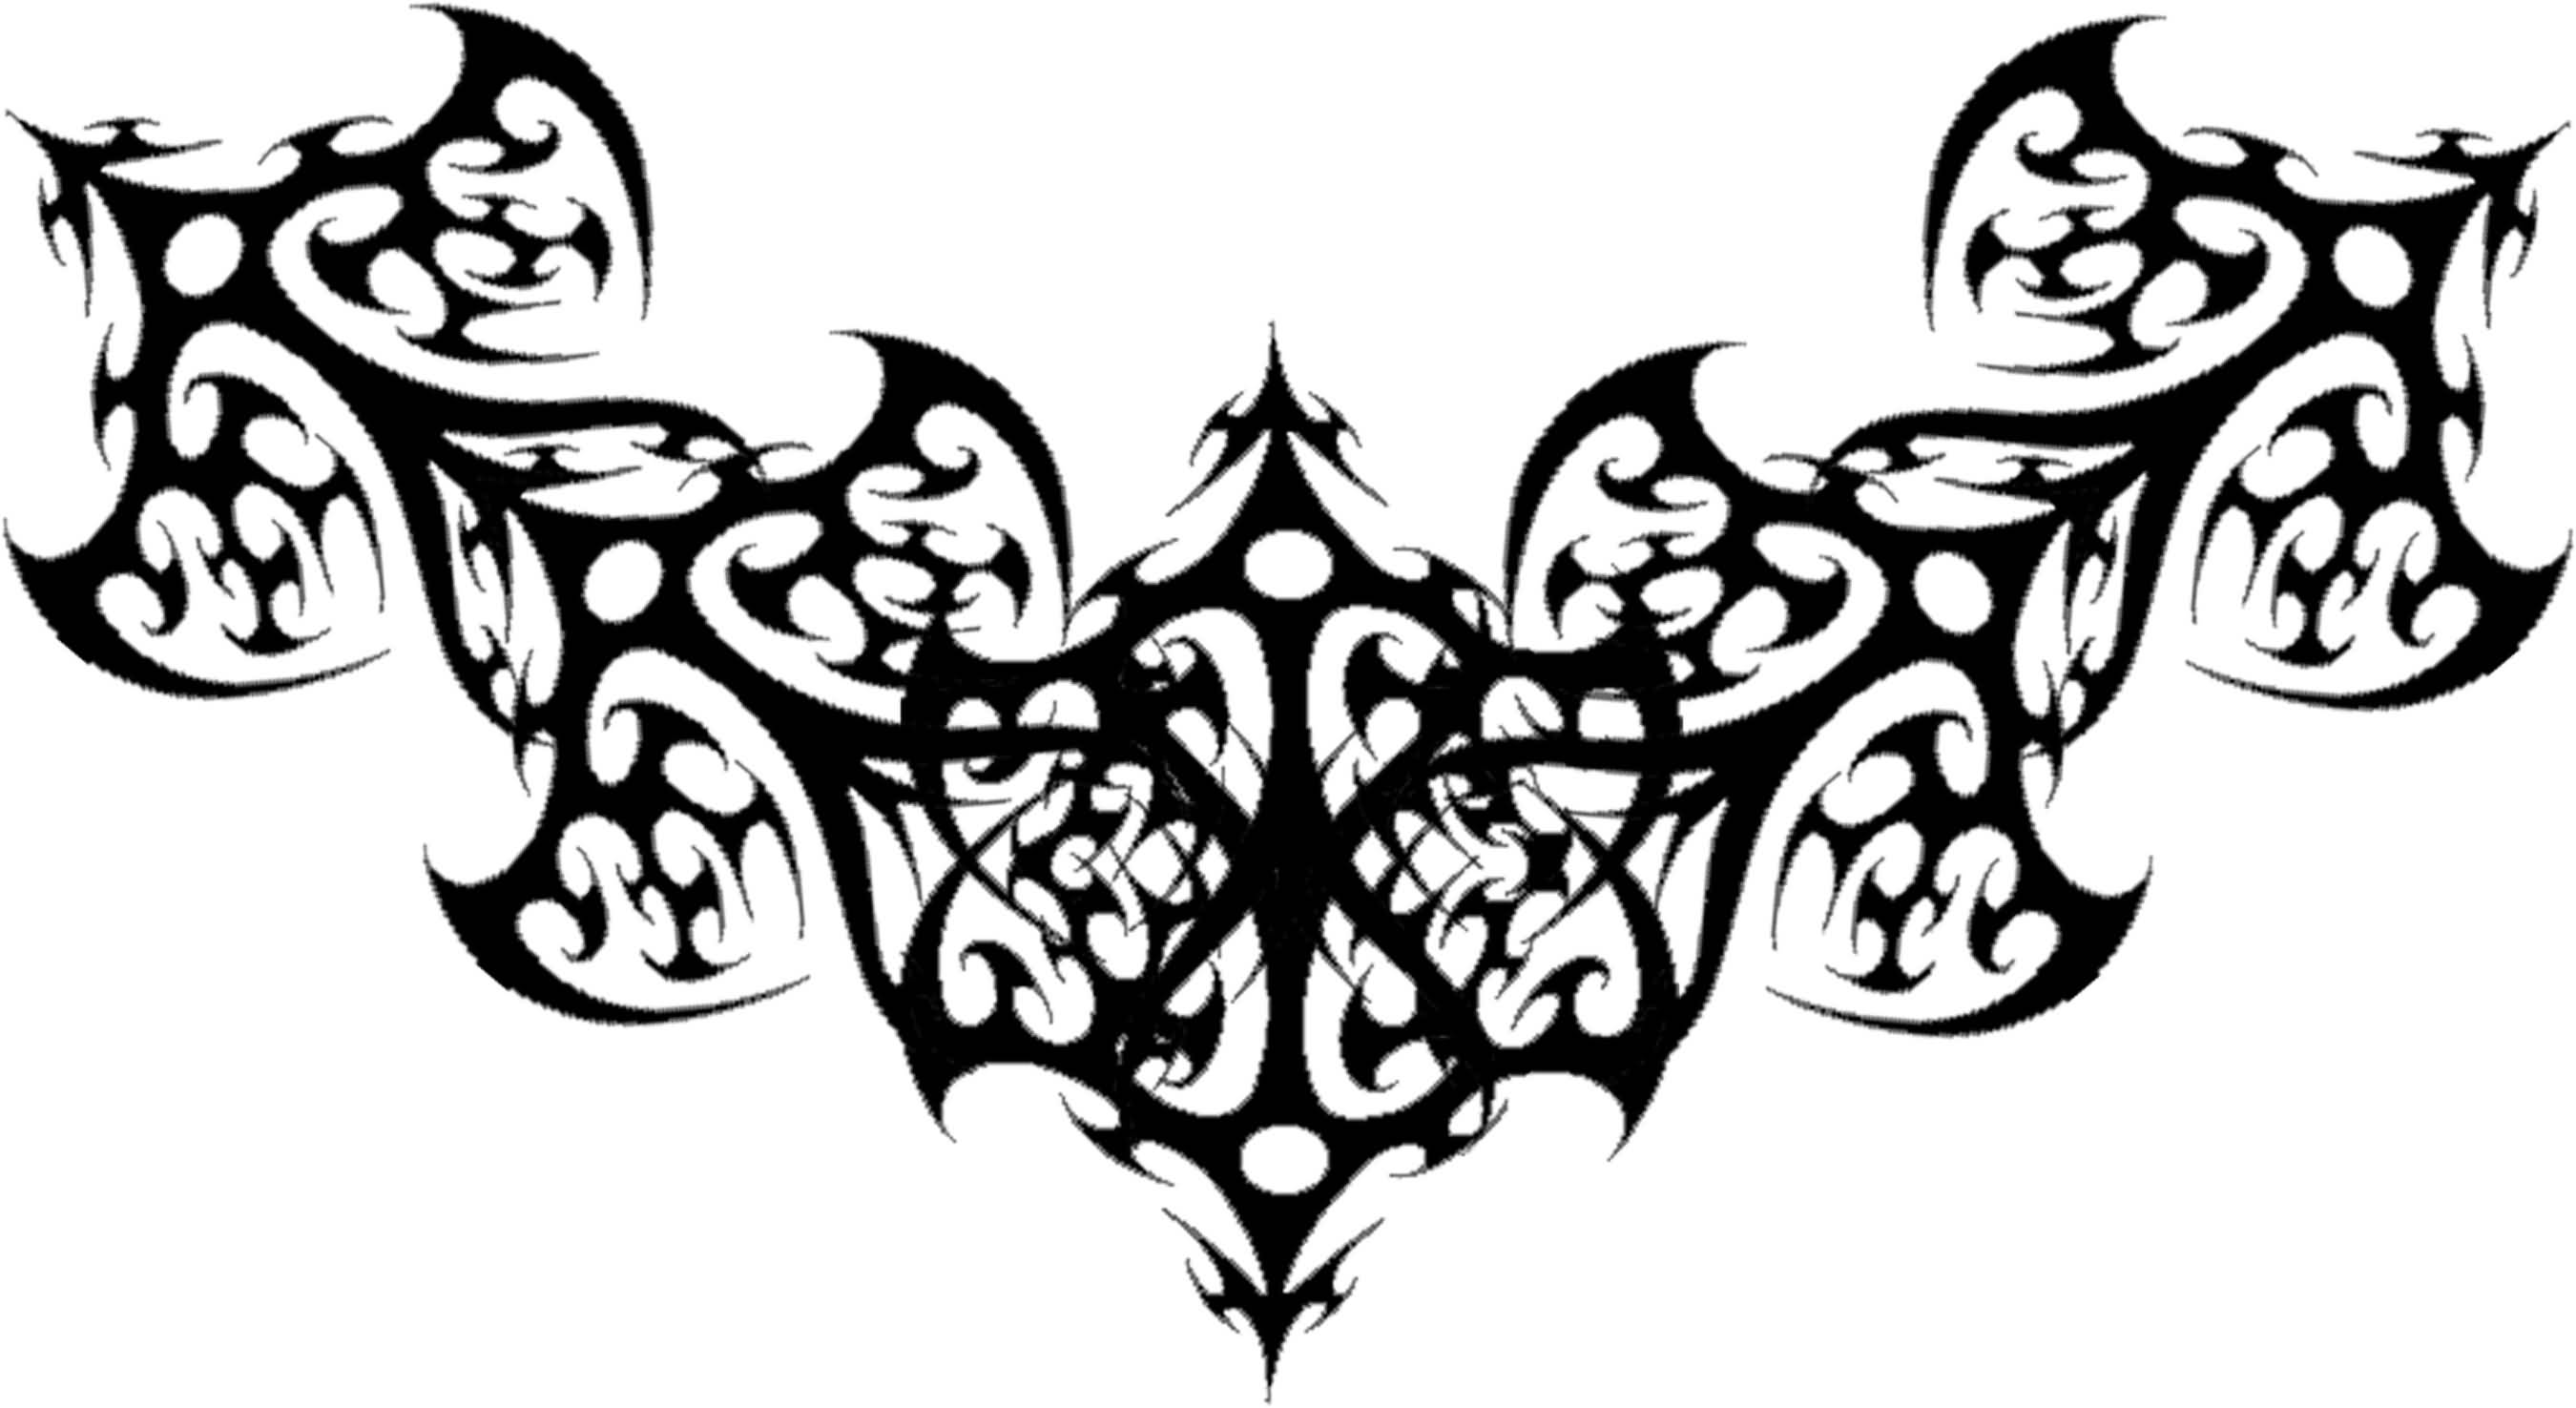 Clip Arts Related To : gothic border design png. view all Gothic Design Cli...